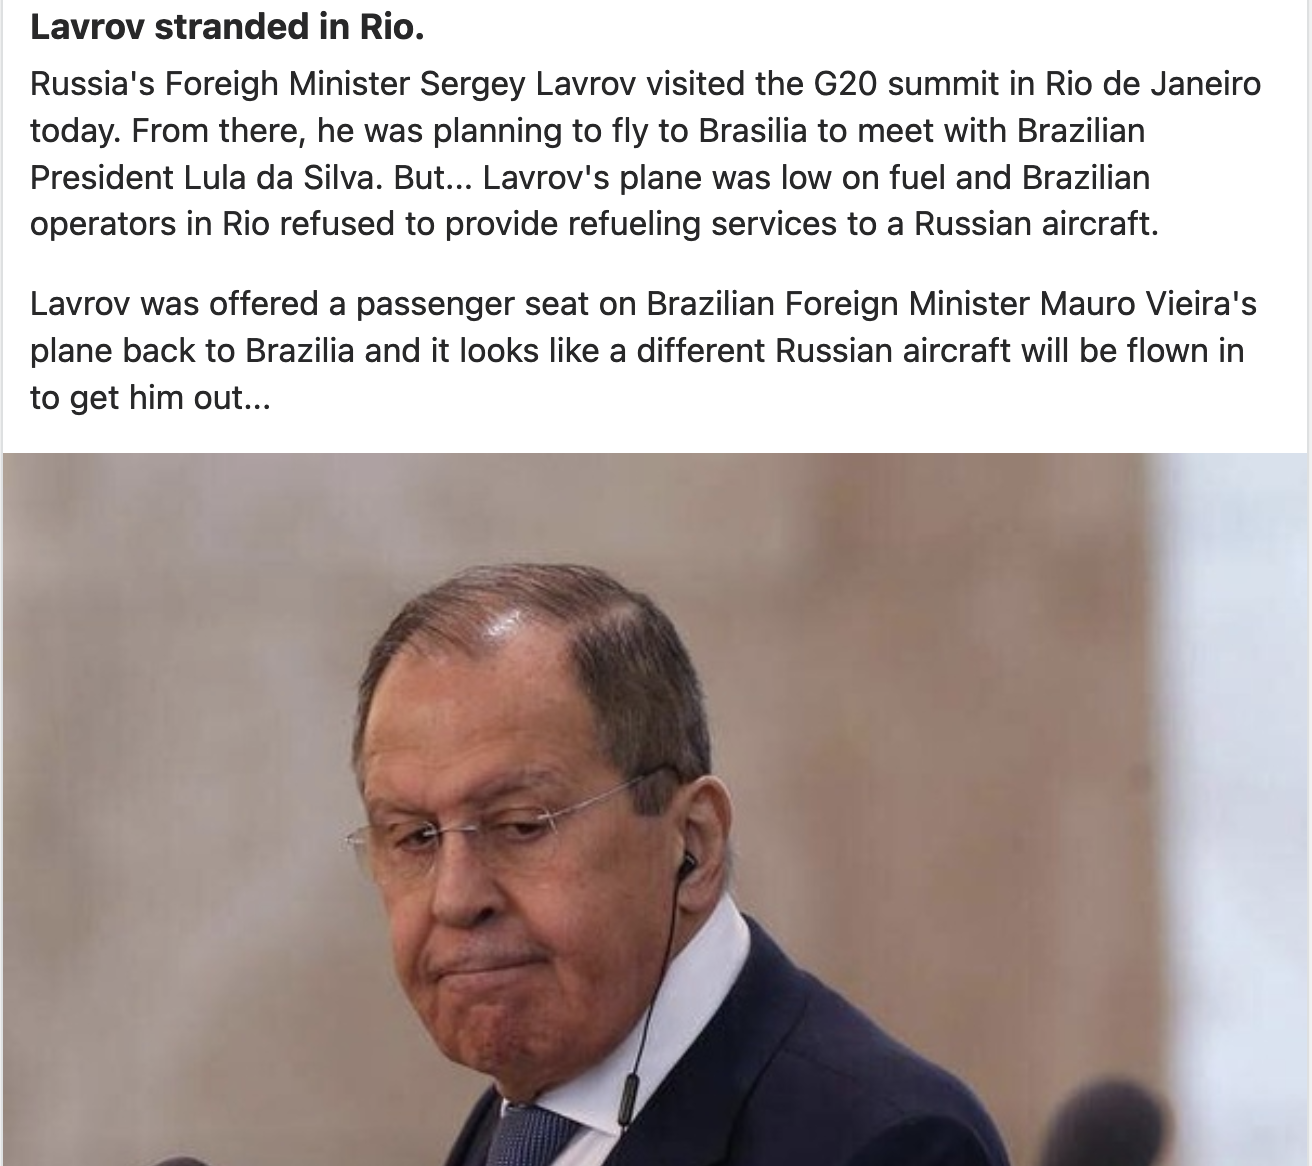 Lavrov stranded in Rio.

Russia's Foreigh Minister Sergey Lavrov visited the G20 summit in Rio de Janeiro
today. From there, he was planning to fly to Brasilia to meet with Brazilian
President Lula da Silva. But... Lavrov's plane was low on fuel and Brazilian
operators in Rio refused to provide refueling services to a Russian aircraft.

Lavrov was offered a passenger seat on Brazilian Foreign Minister Mauro Vieira's
plane back to Brazilia and it looks like a different Russian aircraft will be flown in
to get him out...